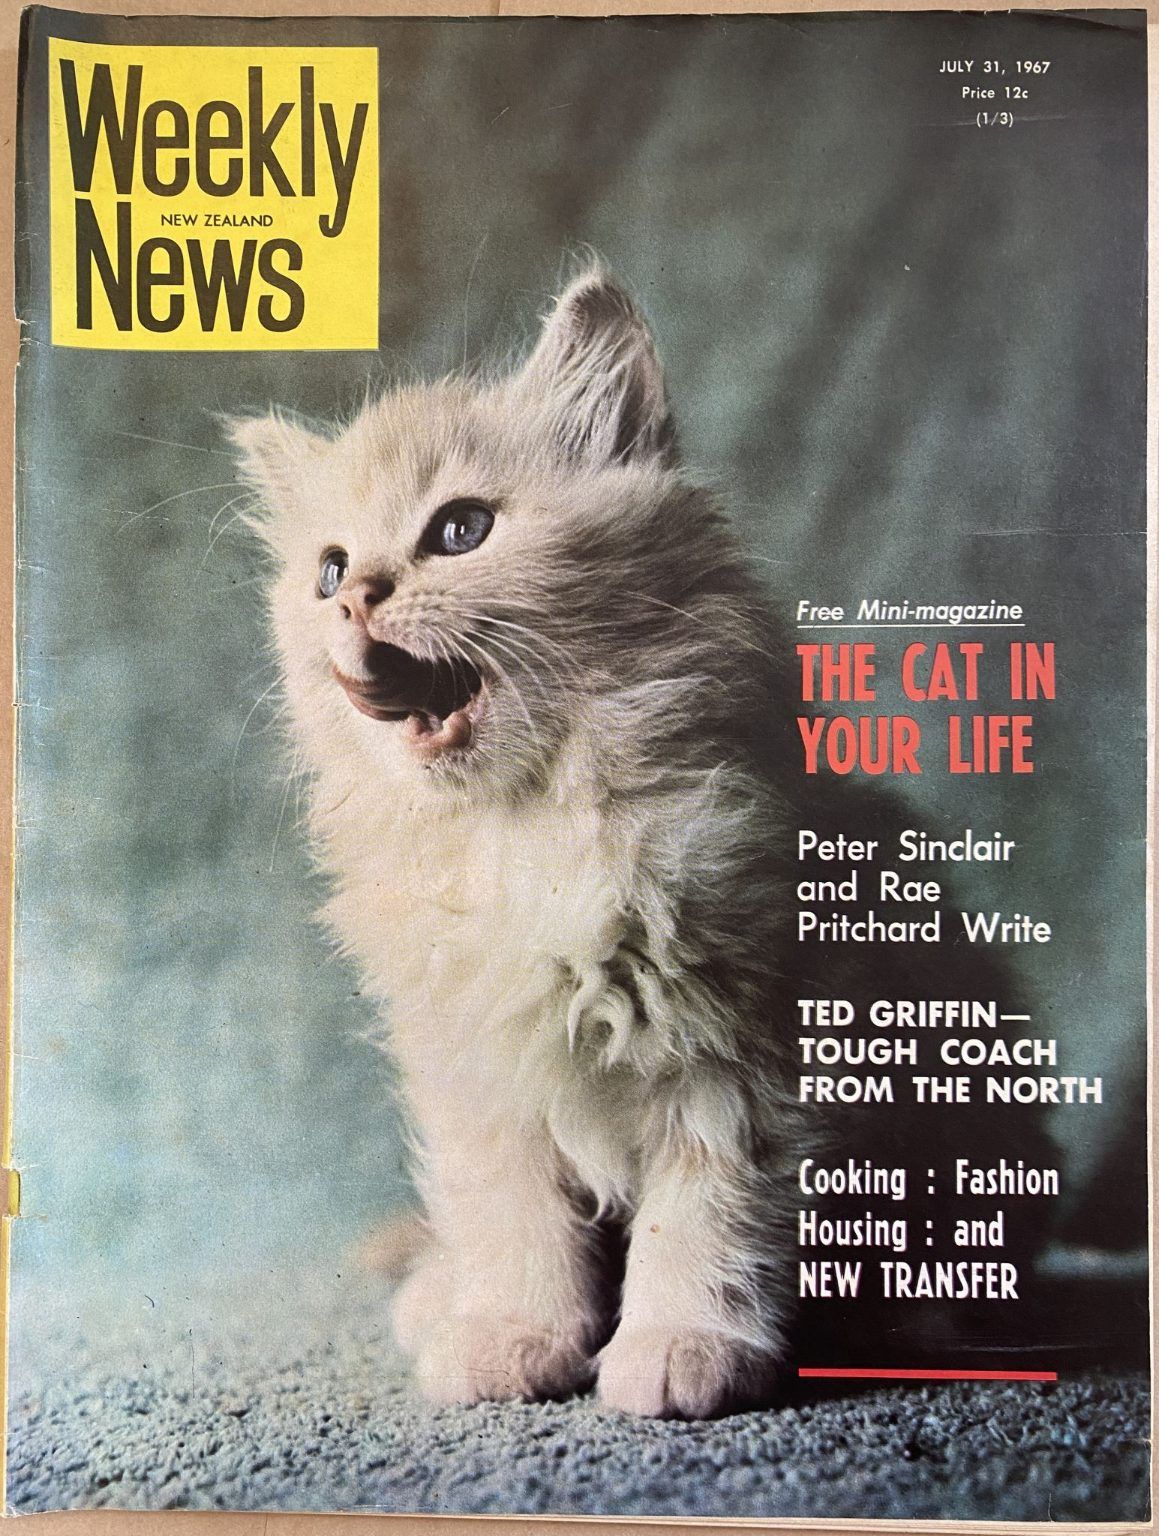 OLD NEWSPAPER: New Zealand Weekly News, No. 5409, 31 July 1967